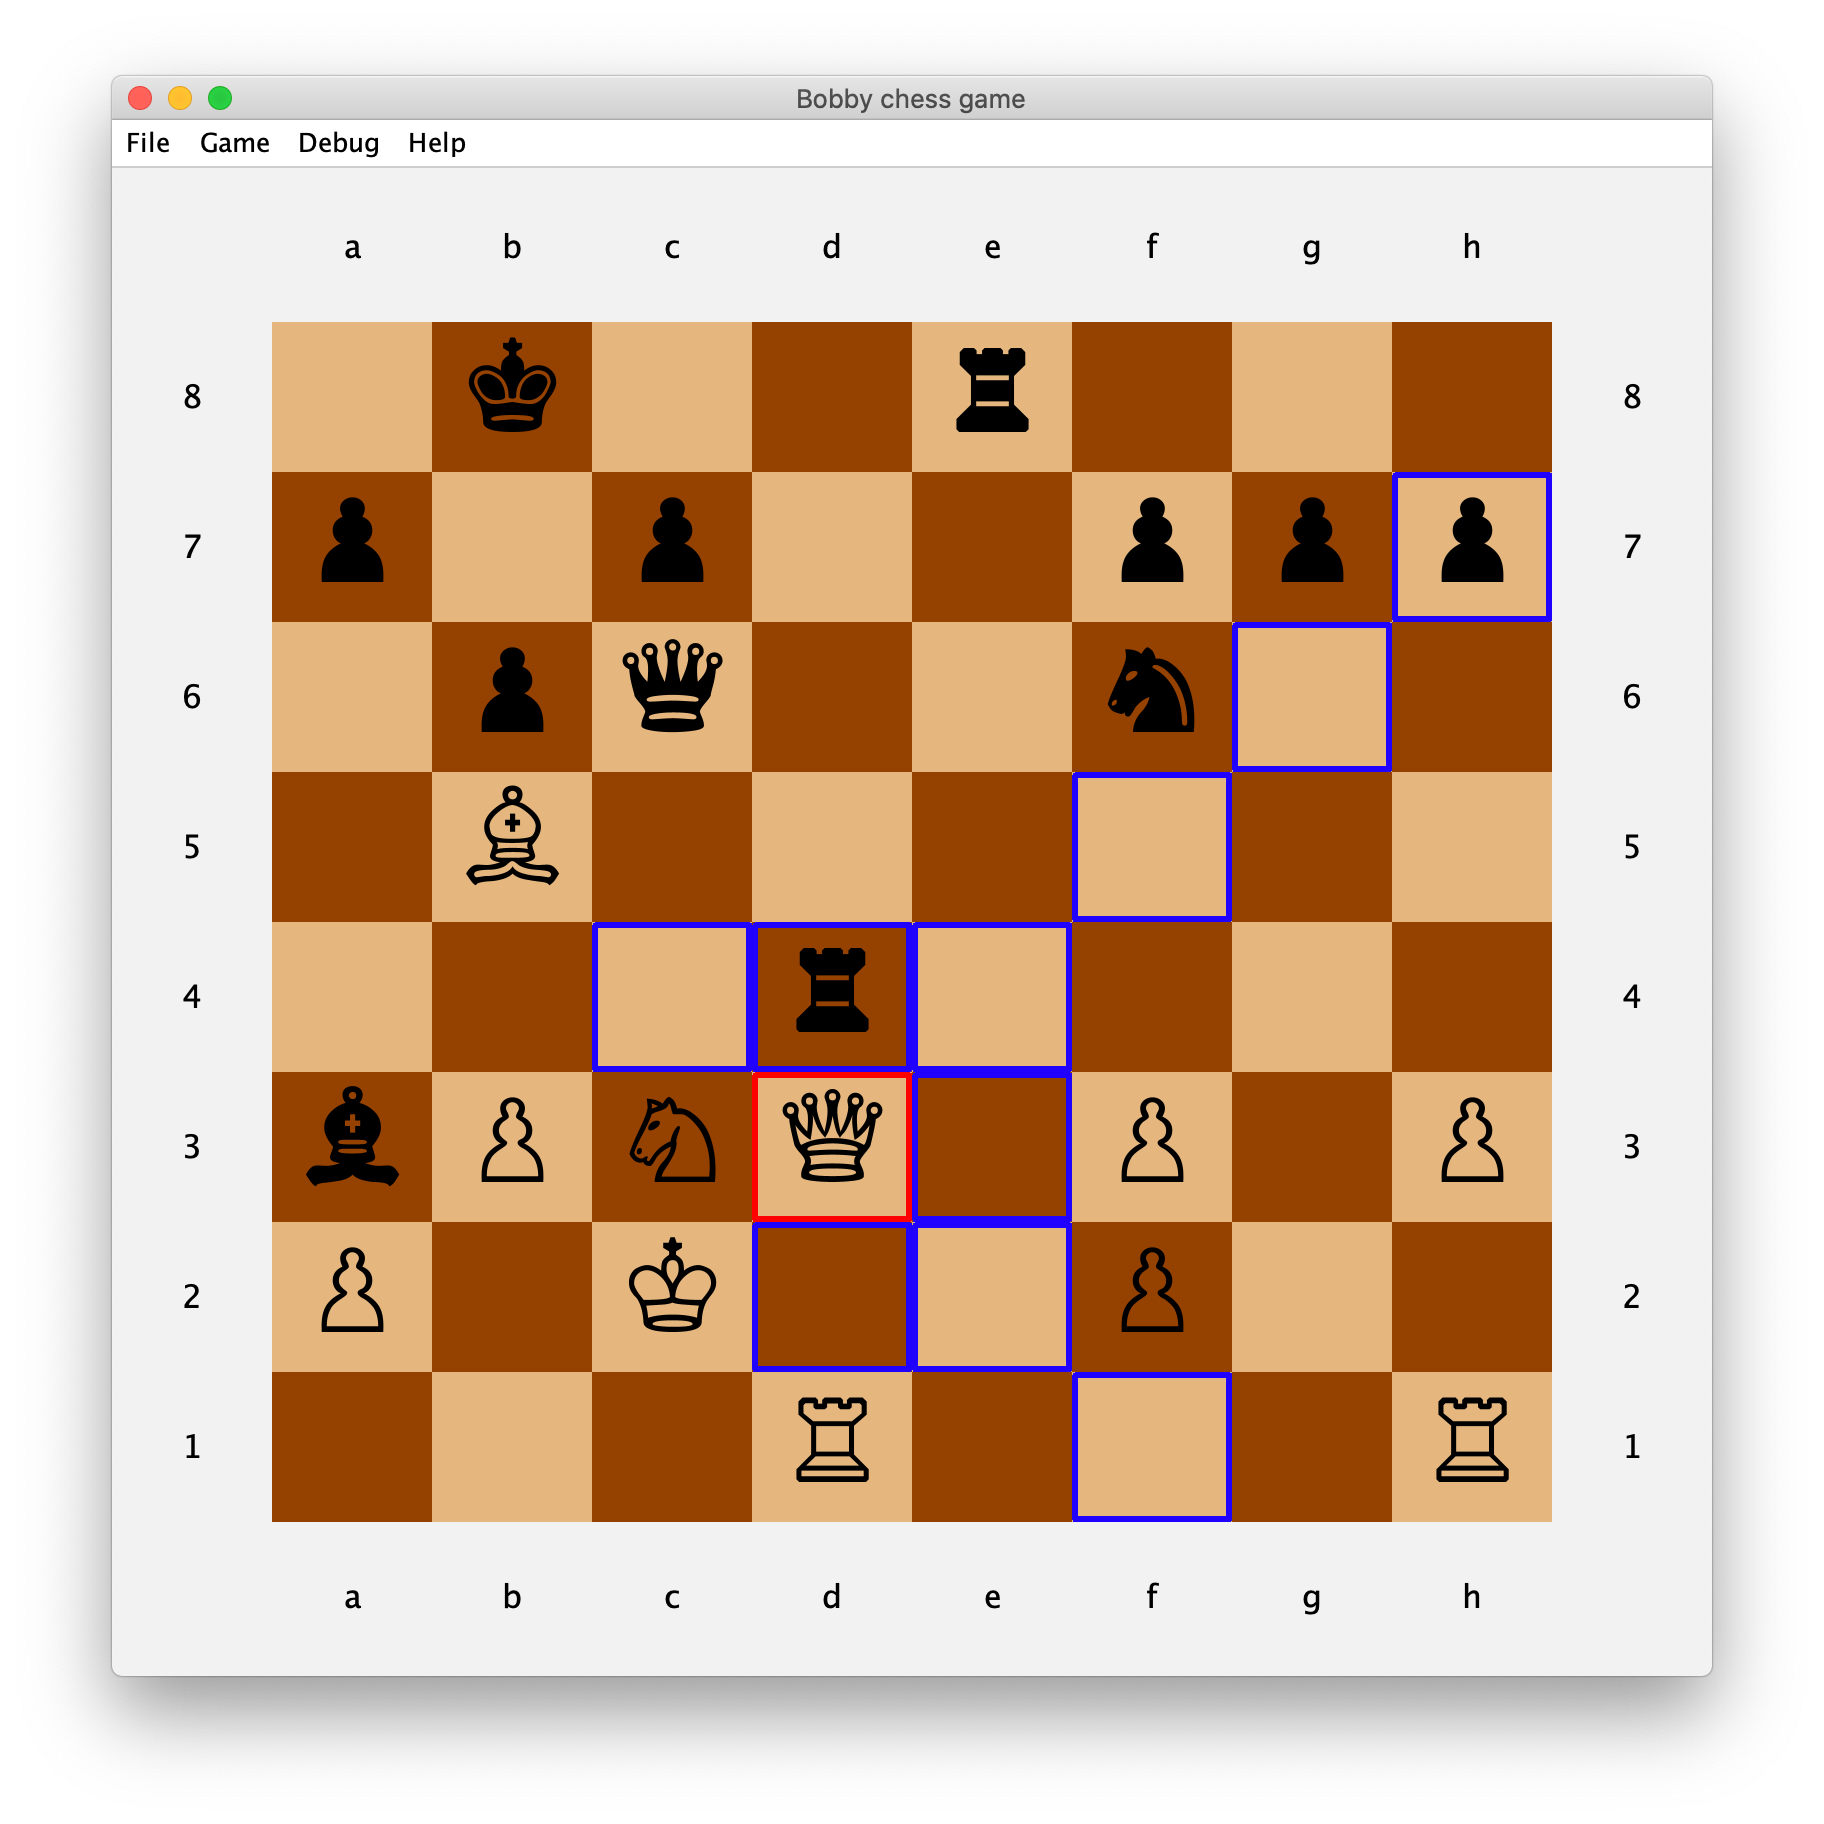 Implementing A Deep Learning Chess Engine From Scratch, by Victor Sim